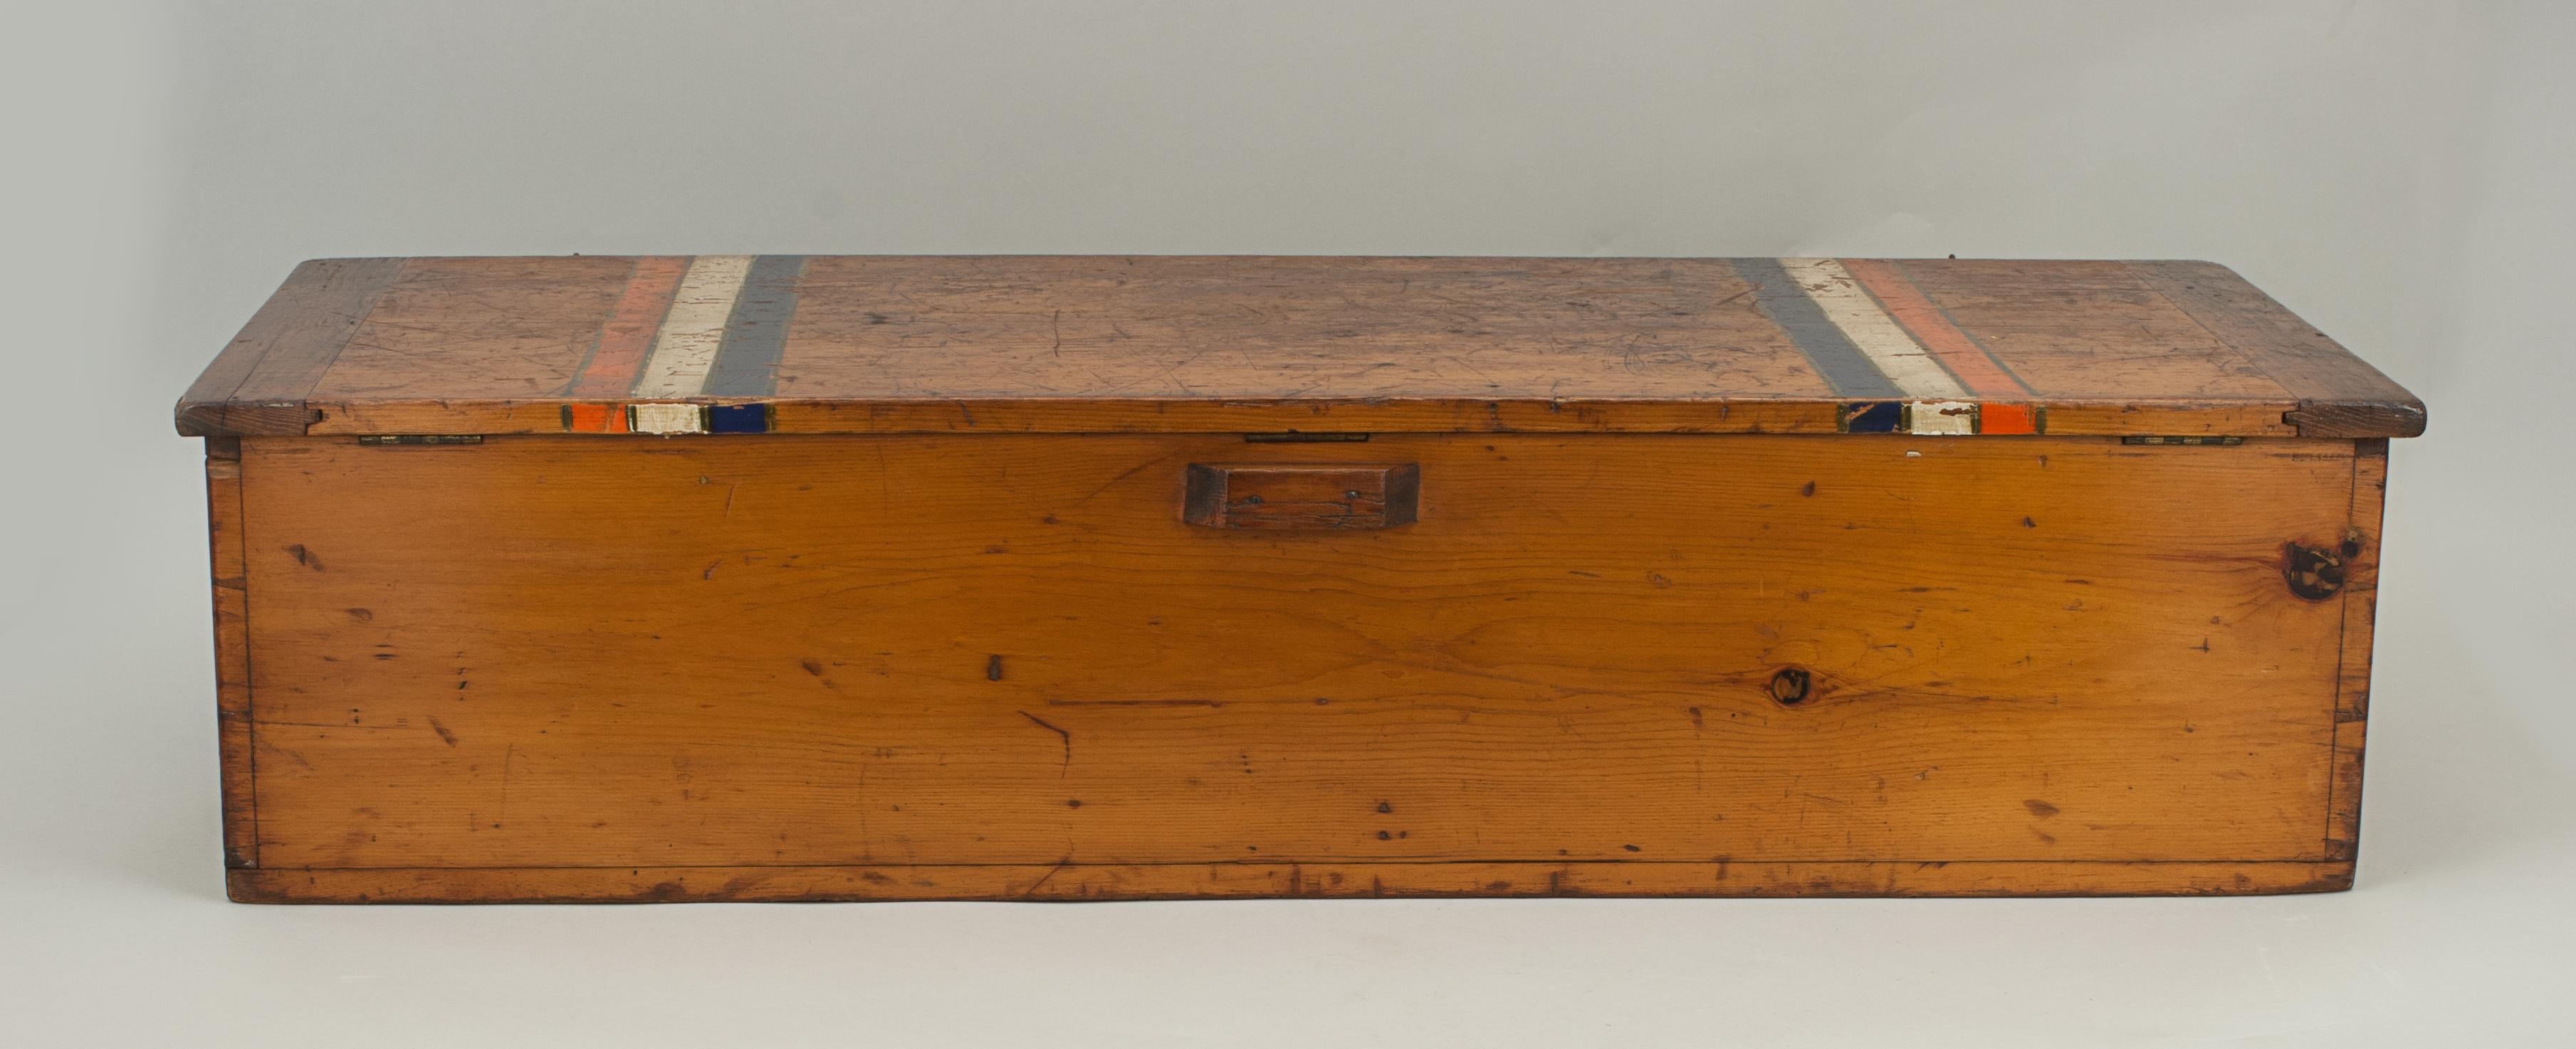 Antique Lawn Tennis Box with Poster, Army and Navy, 1870, s 2